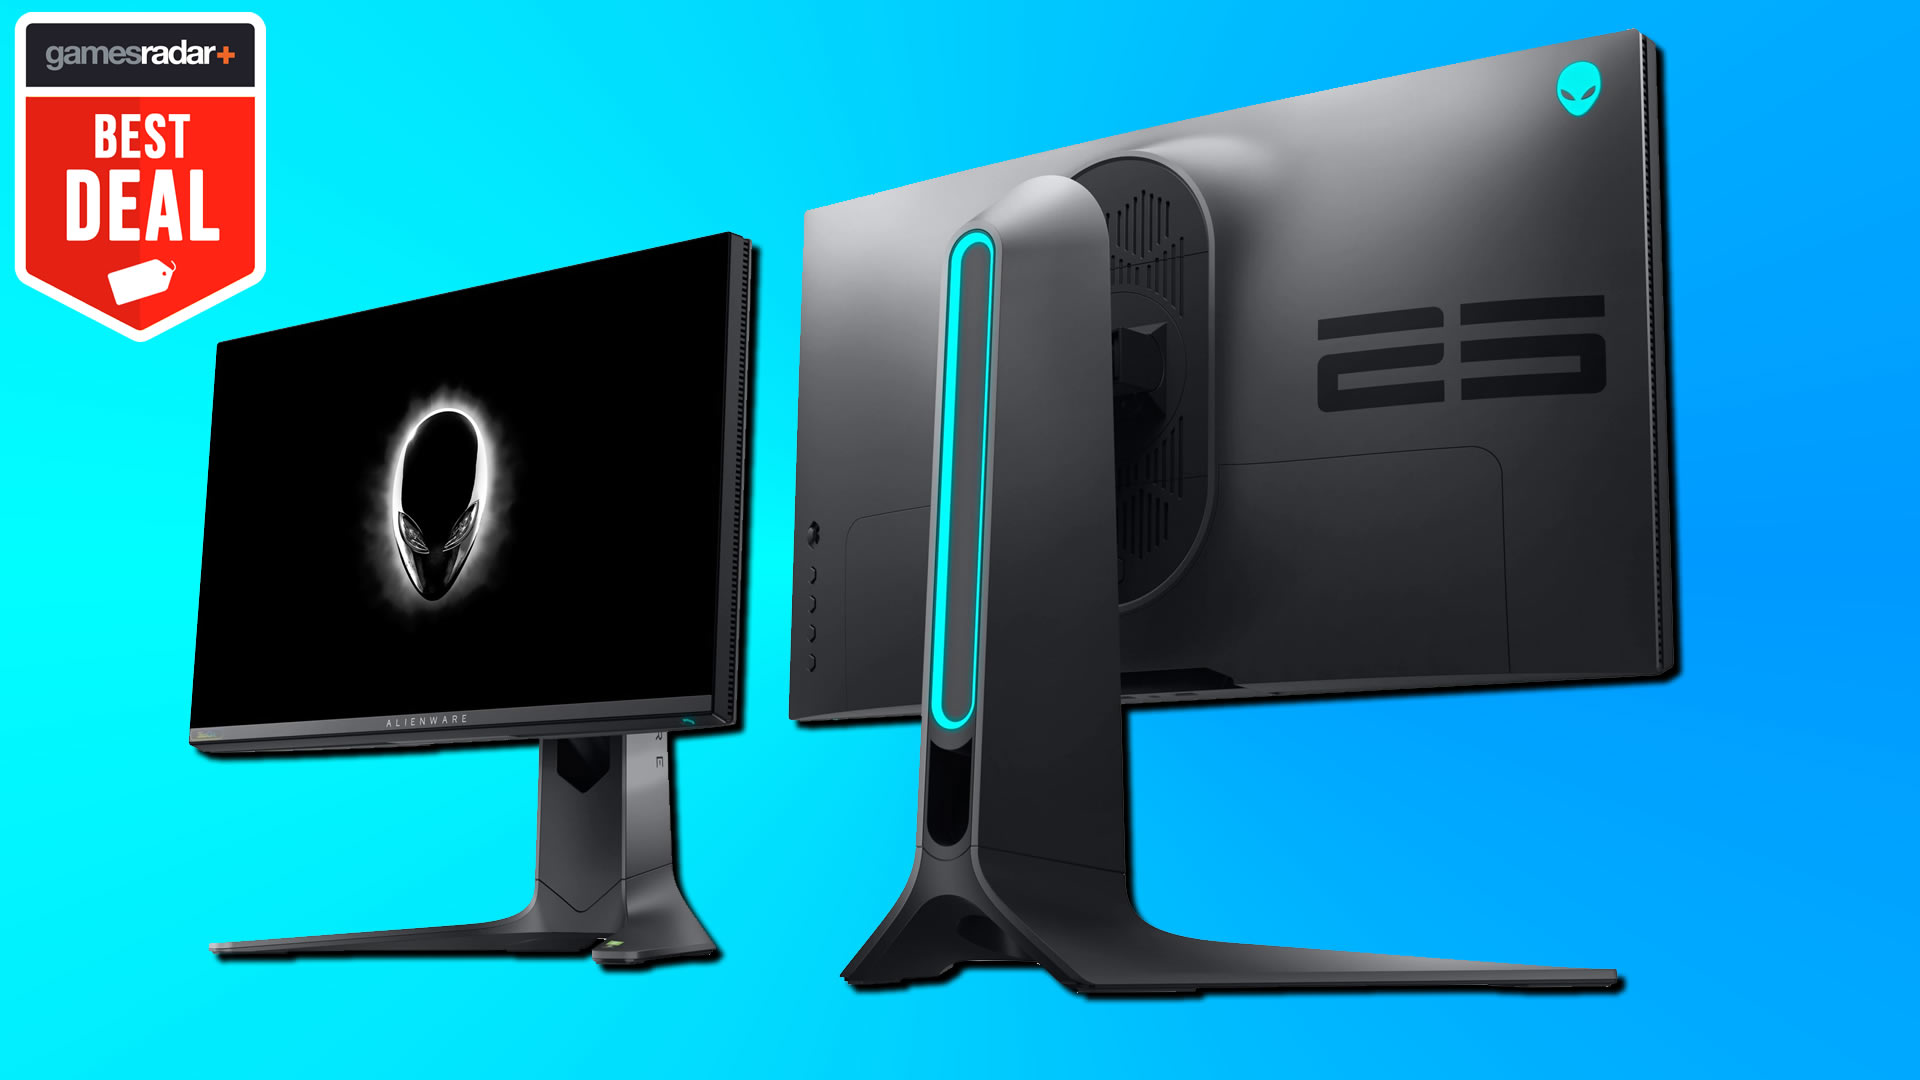 New Alienware AW2521H Gaming Monitor